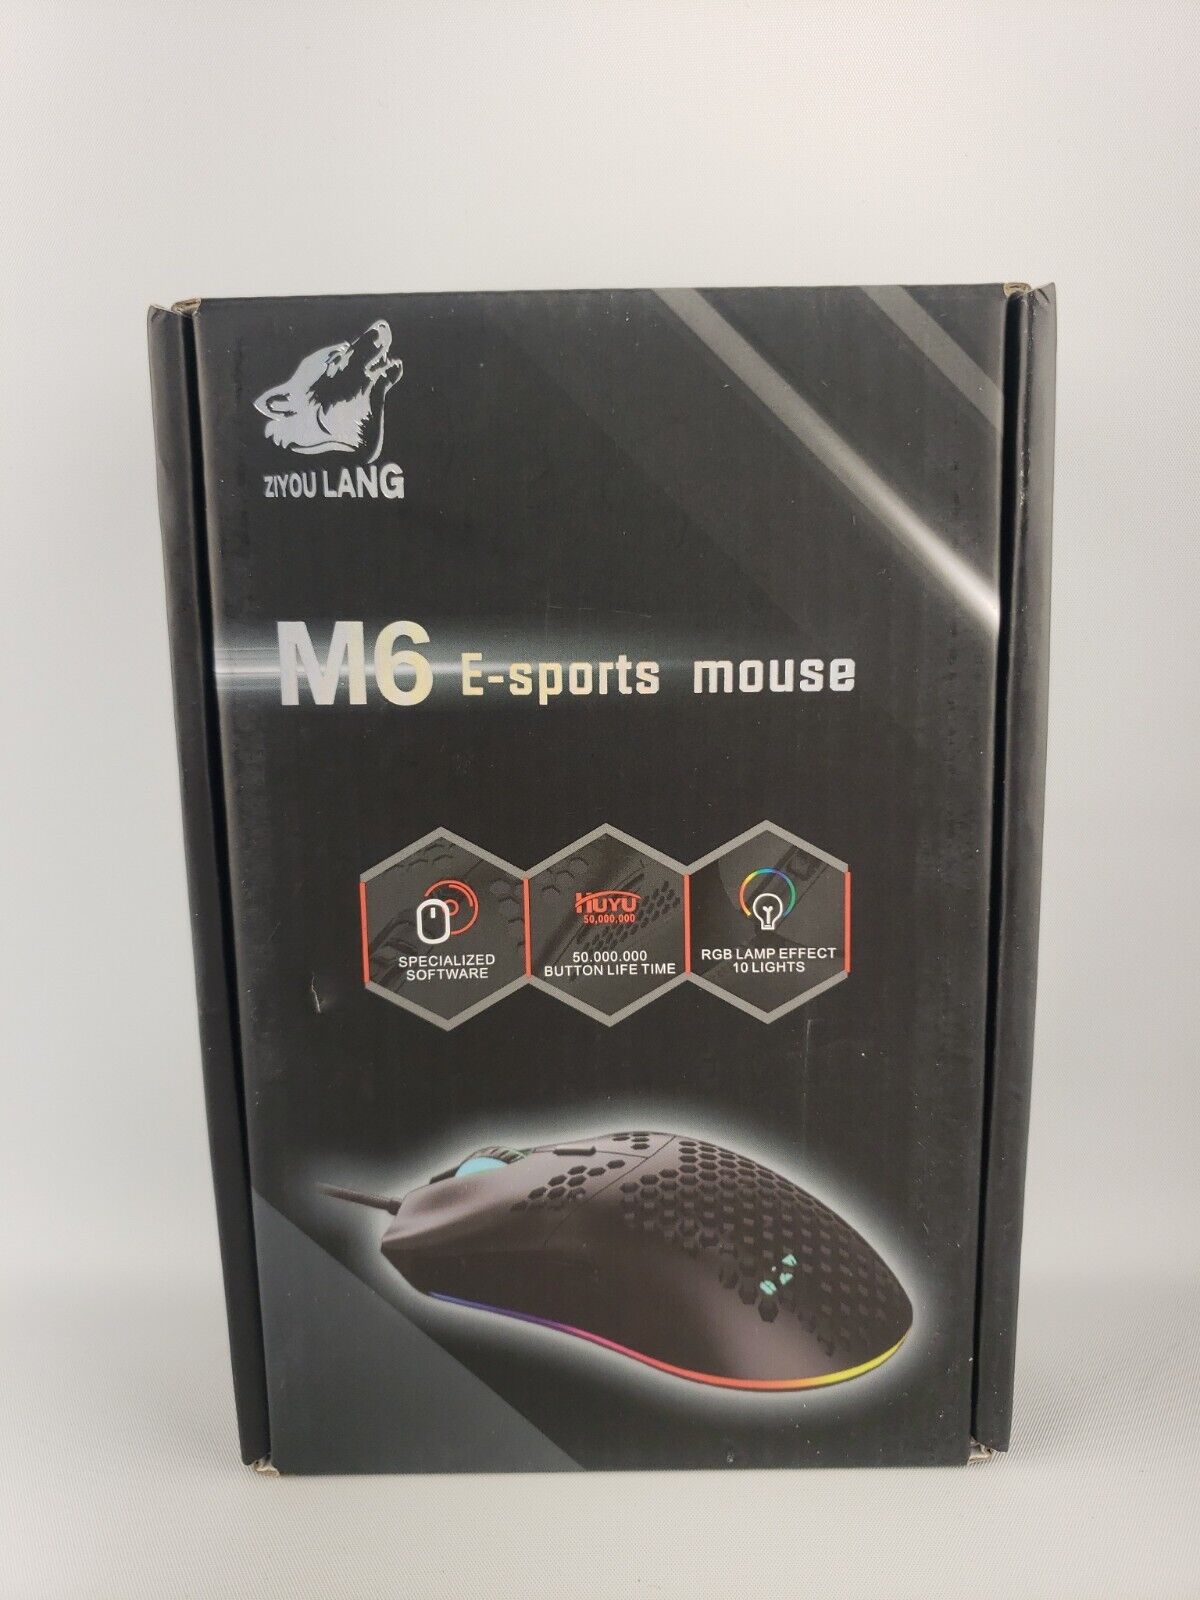 Ziyou Lang M6 E-sports Mouse With RGB Lights Pink